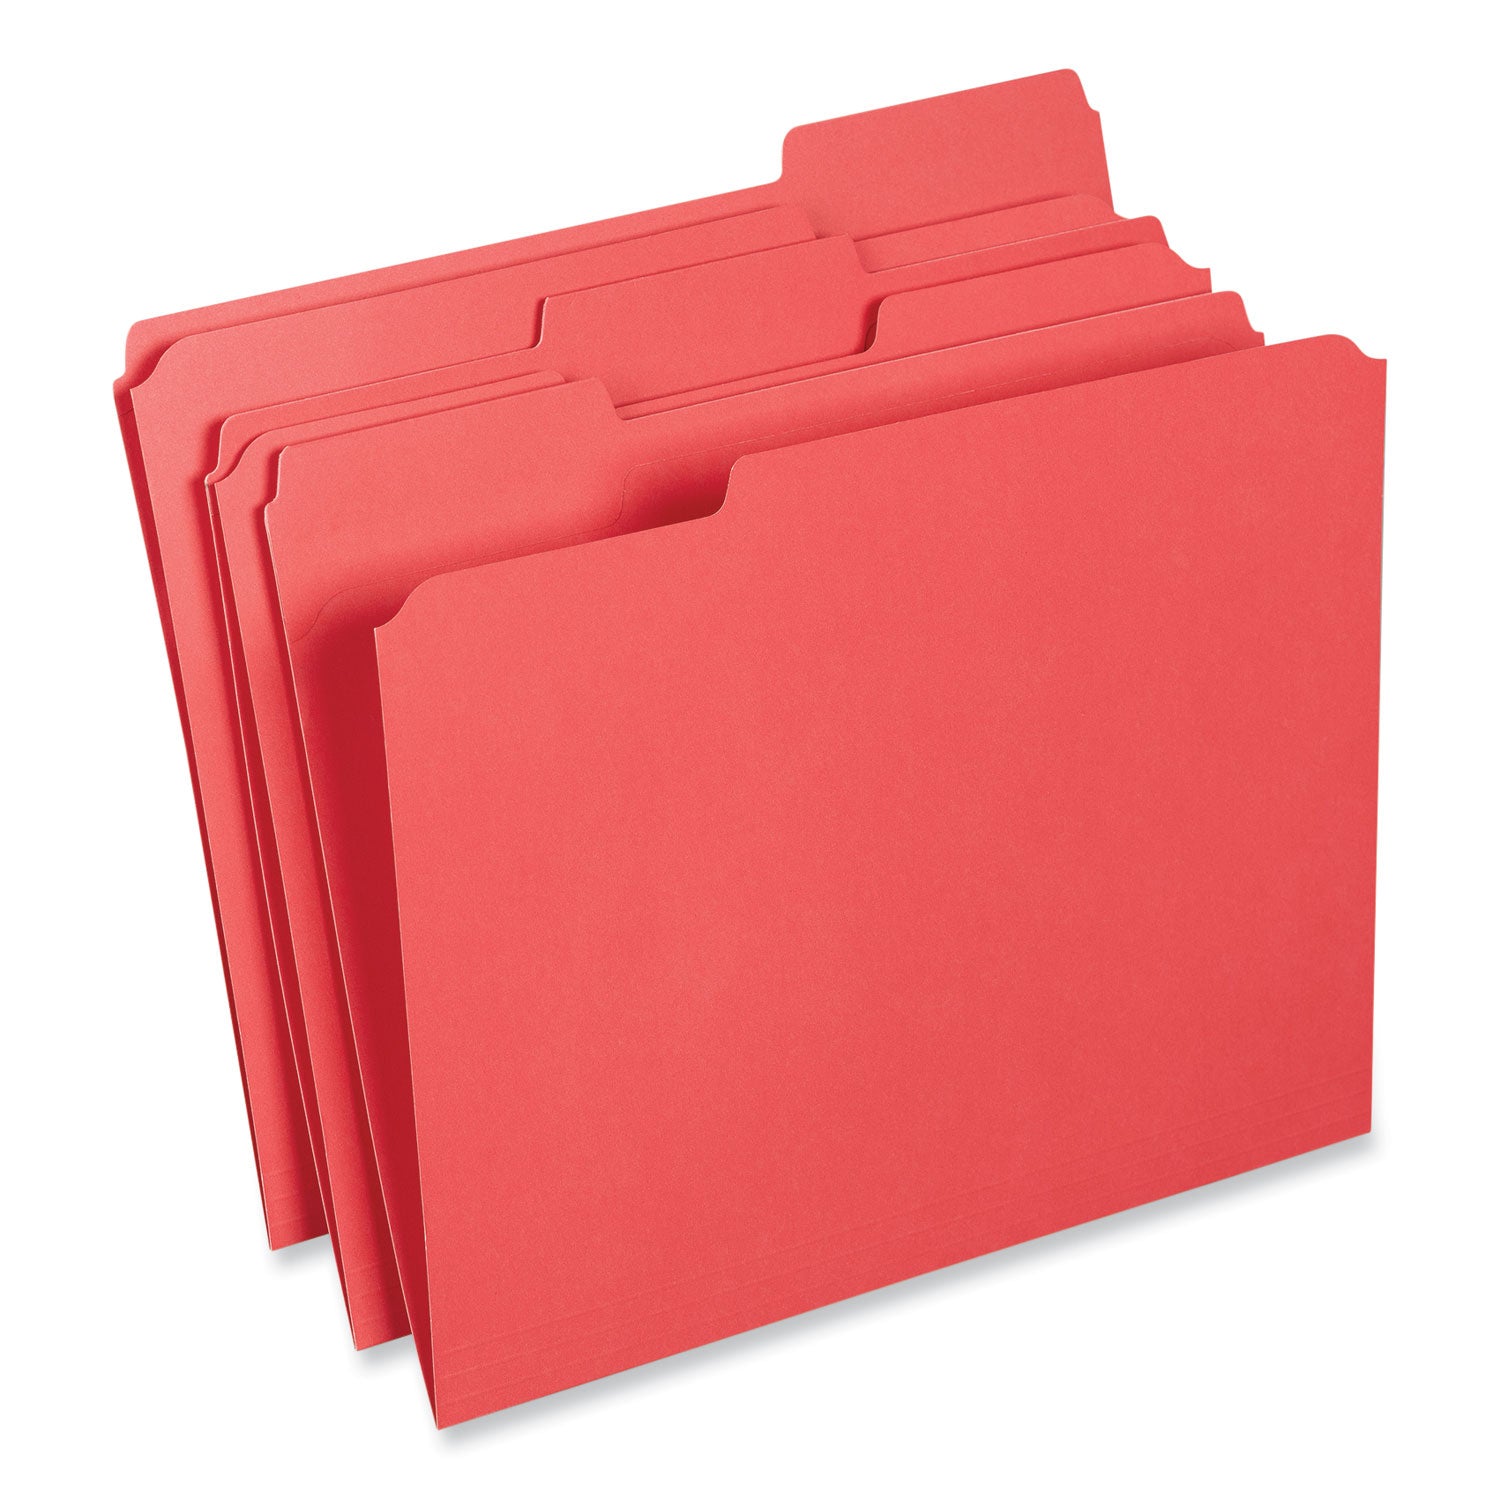 Reinforced Top-Tab File Folders, 1/3-Cut Tabs: Assorted, Letter Size, 1" Expansion, Red, 100/Box - 